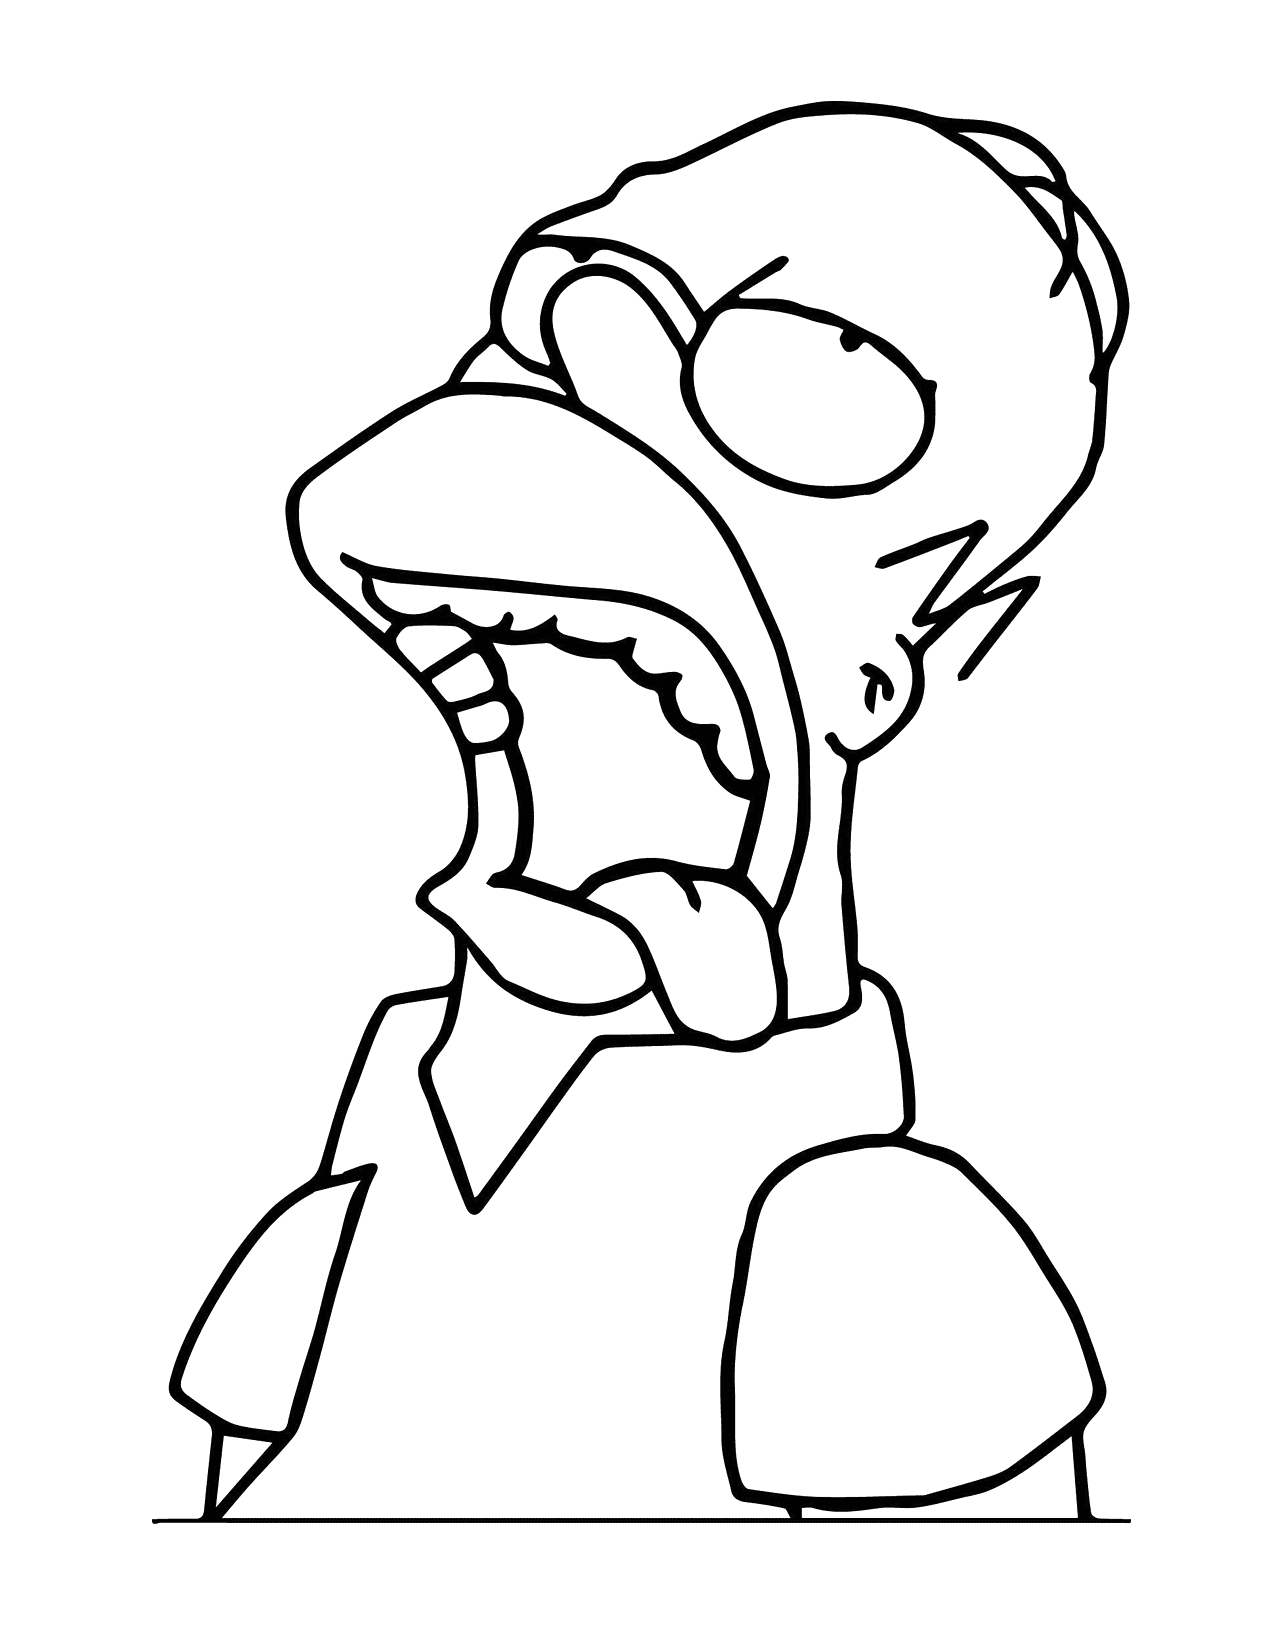 Funny Homer Simpson Coloring Page